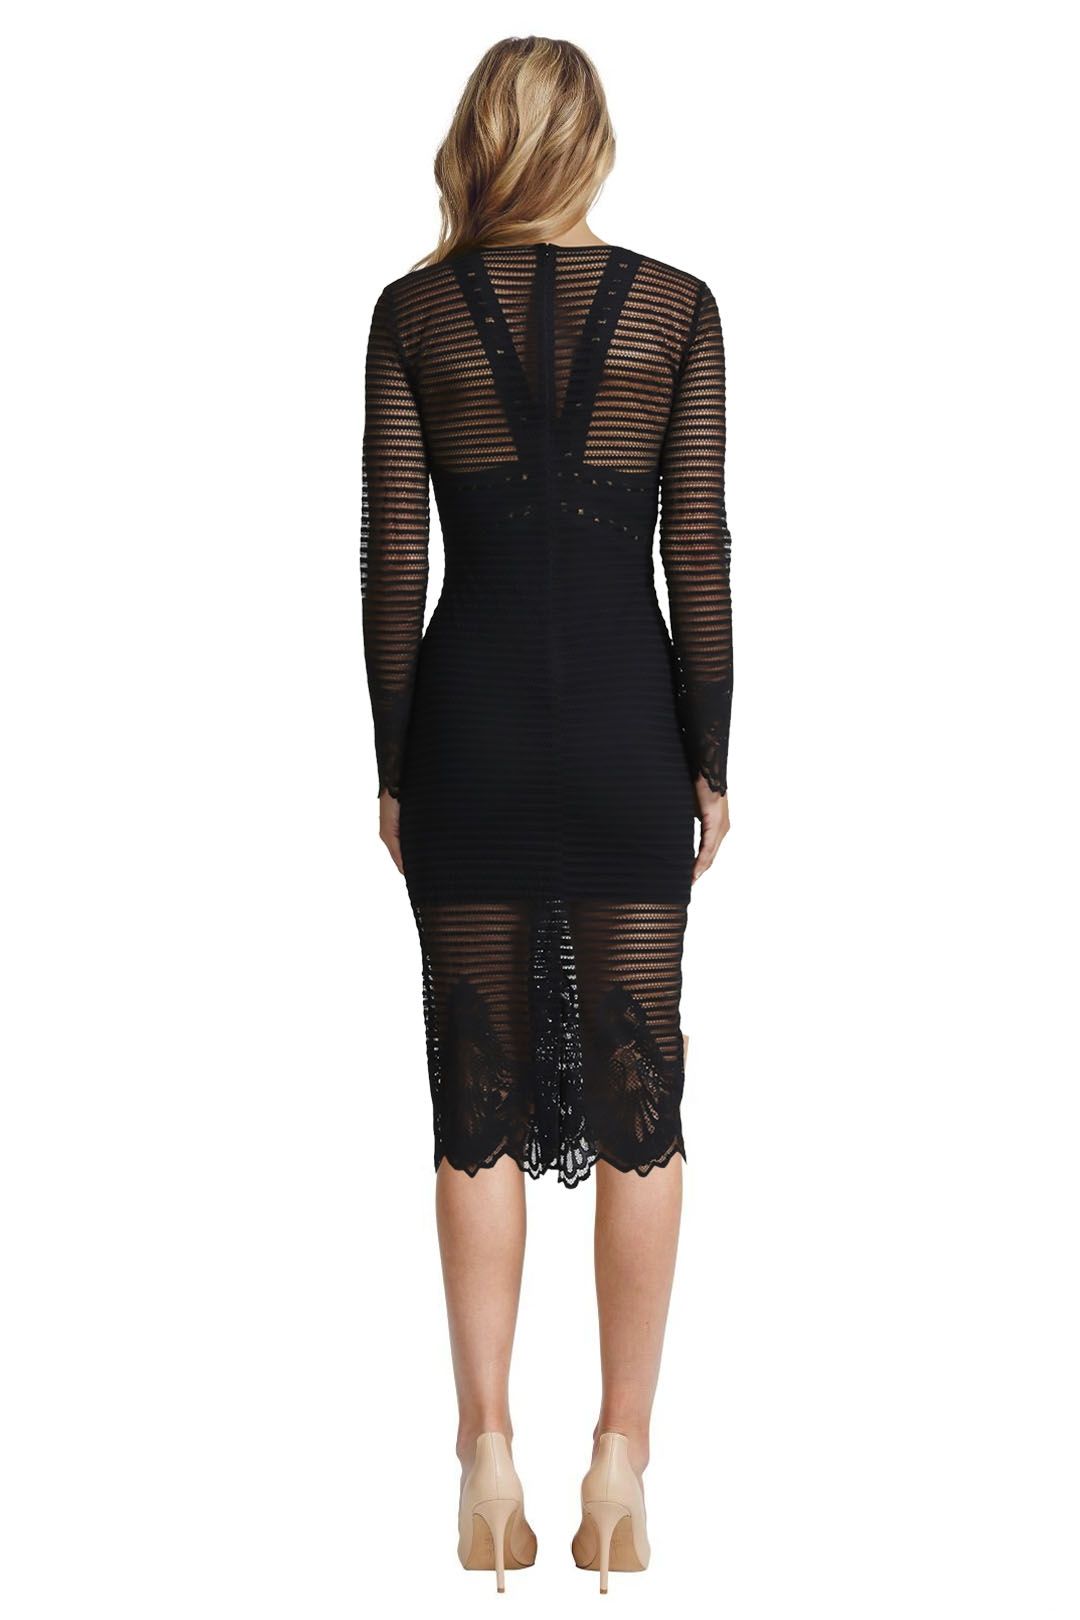 Alice McCall - There's No Other Way Dress - Black - Back